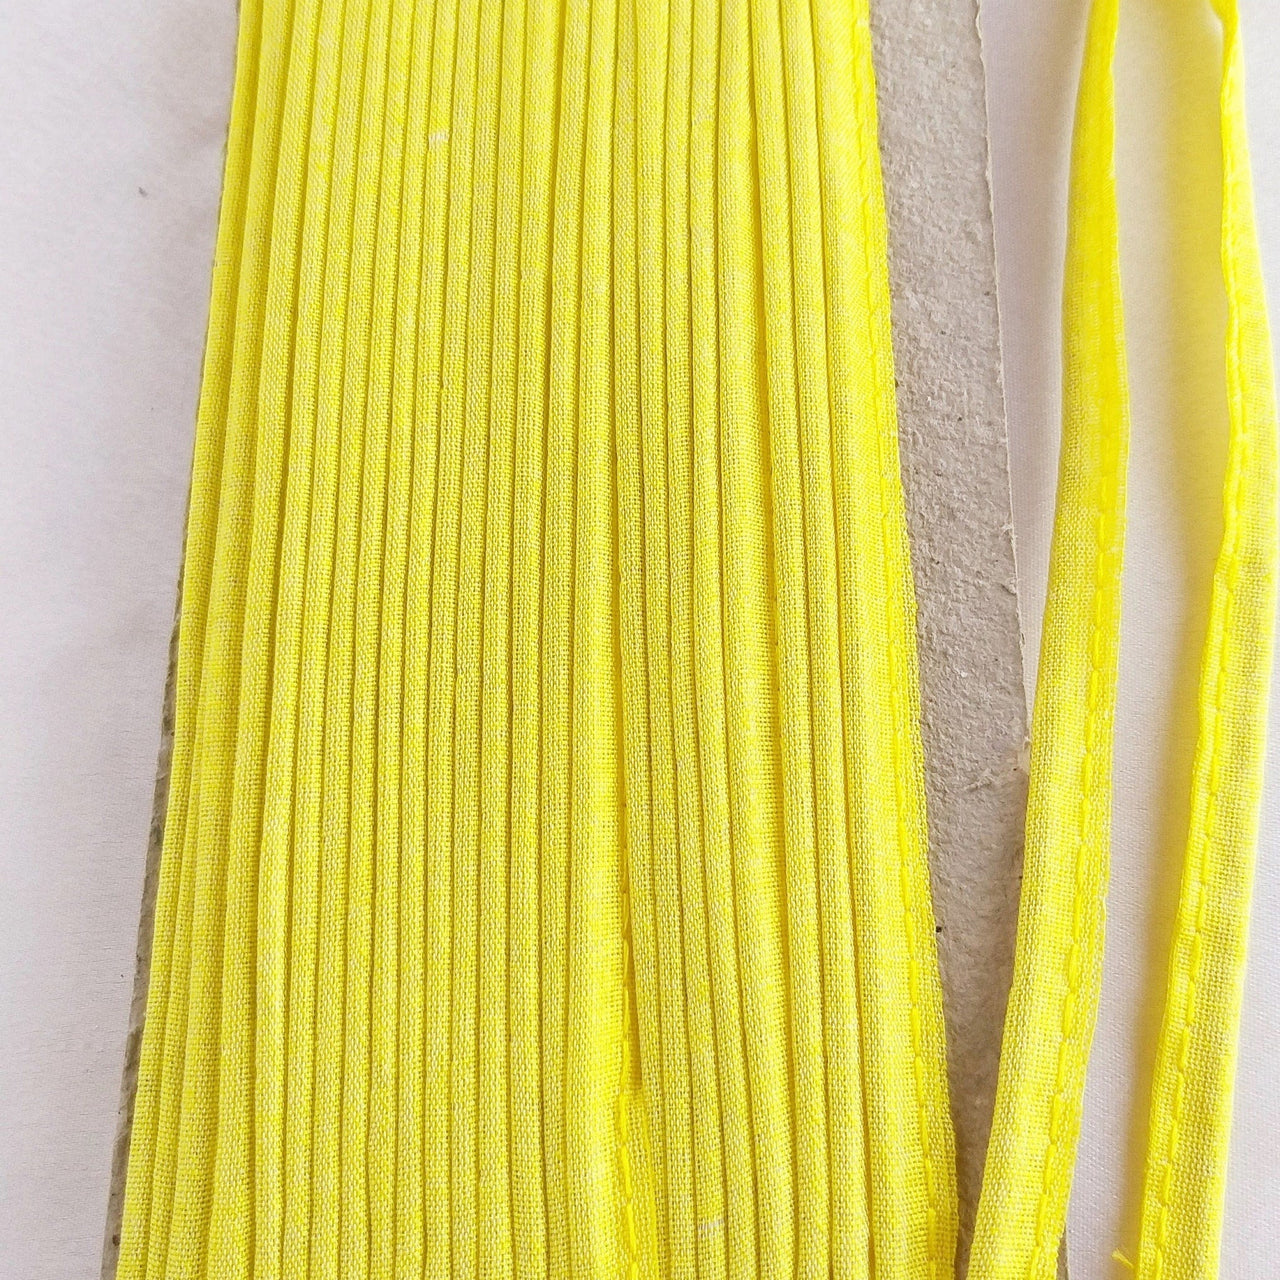 2mm Flanged Insertion Piping on 9mm Band, Yellow Art Silk Fabric Trim, Cord piping Trim